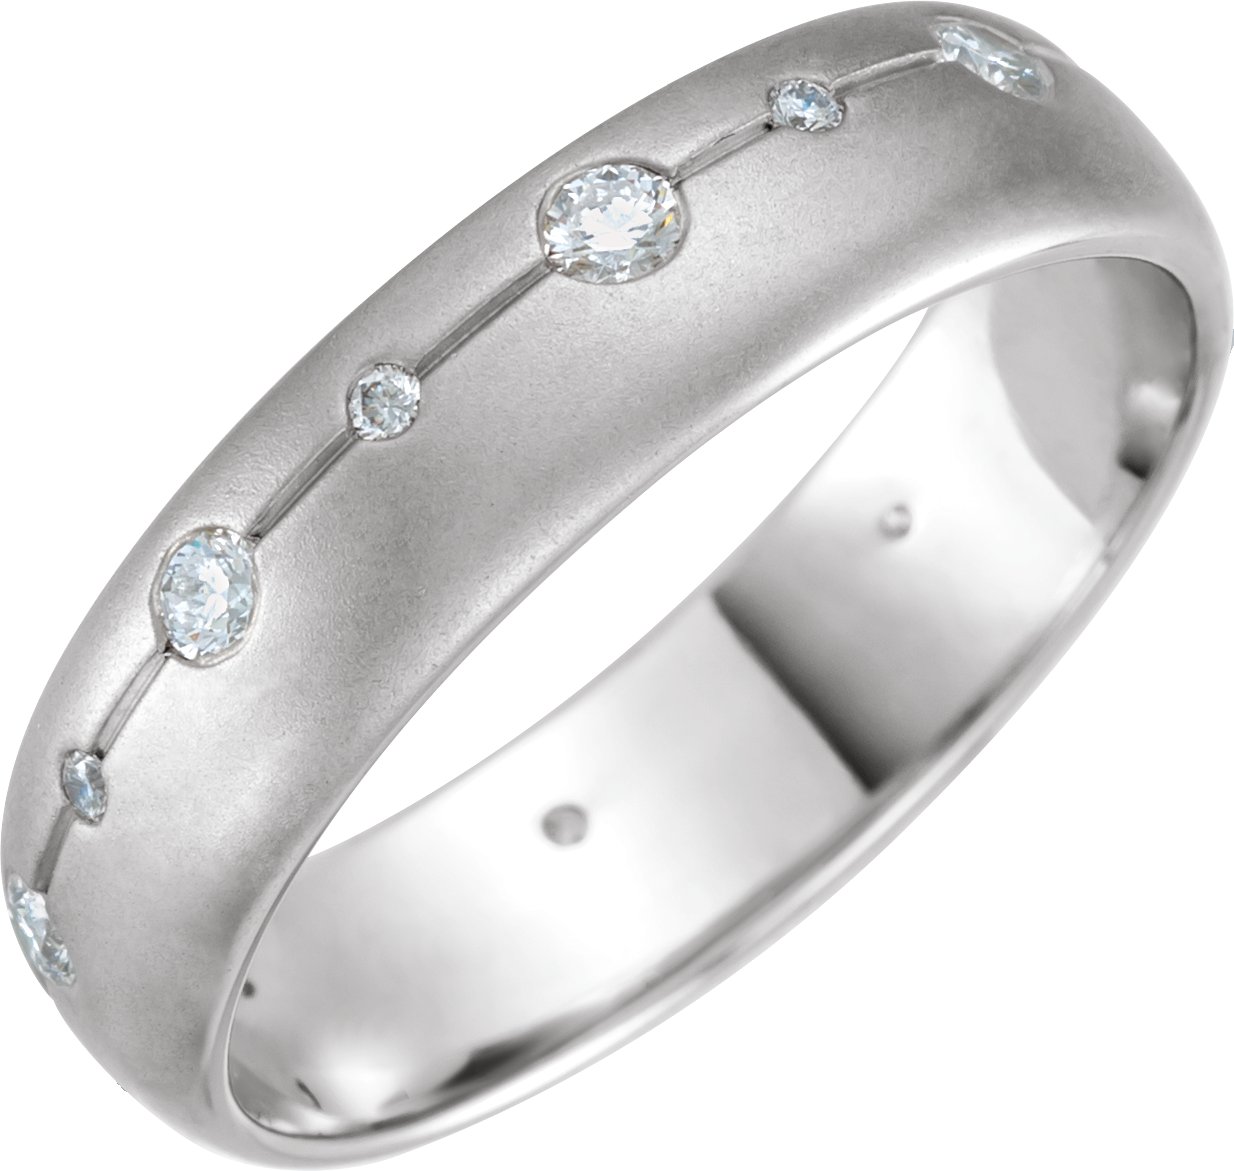 14K White 6 mm .5 CTW Diamond Grooved Band with Brush Finish Size 7 Ref 11543669